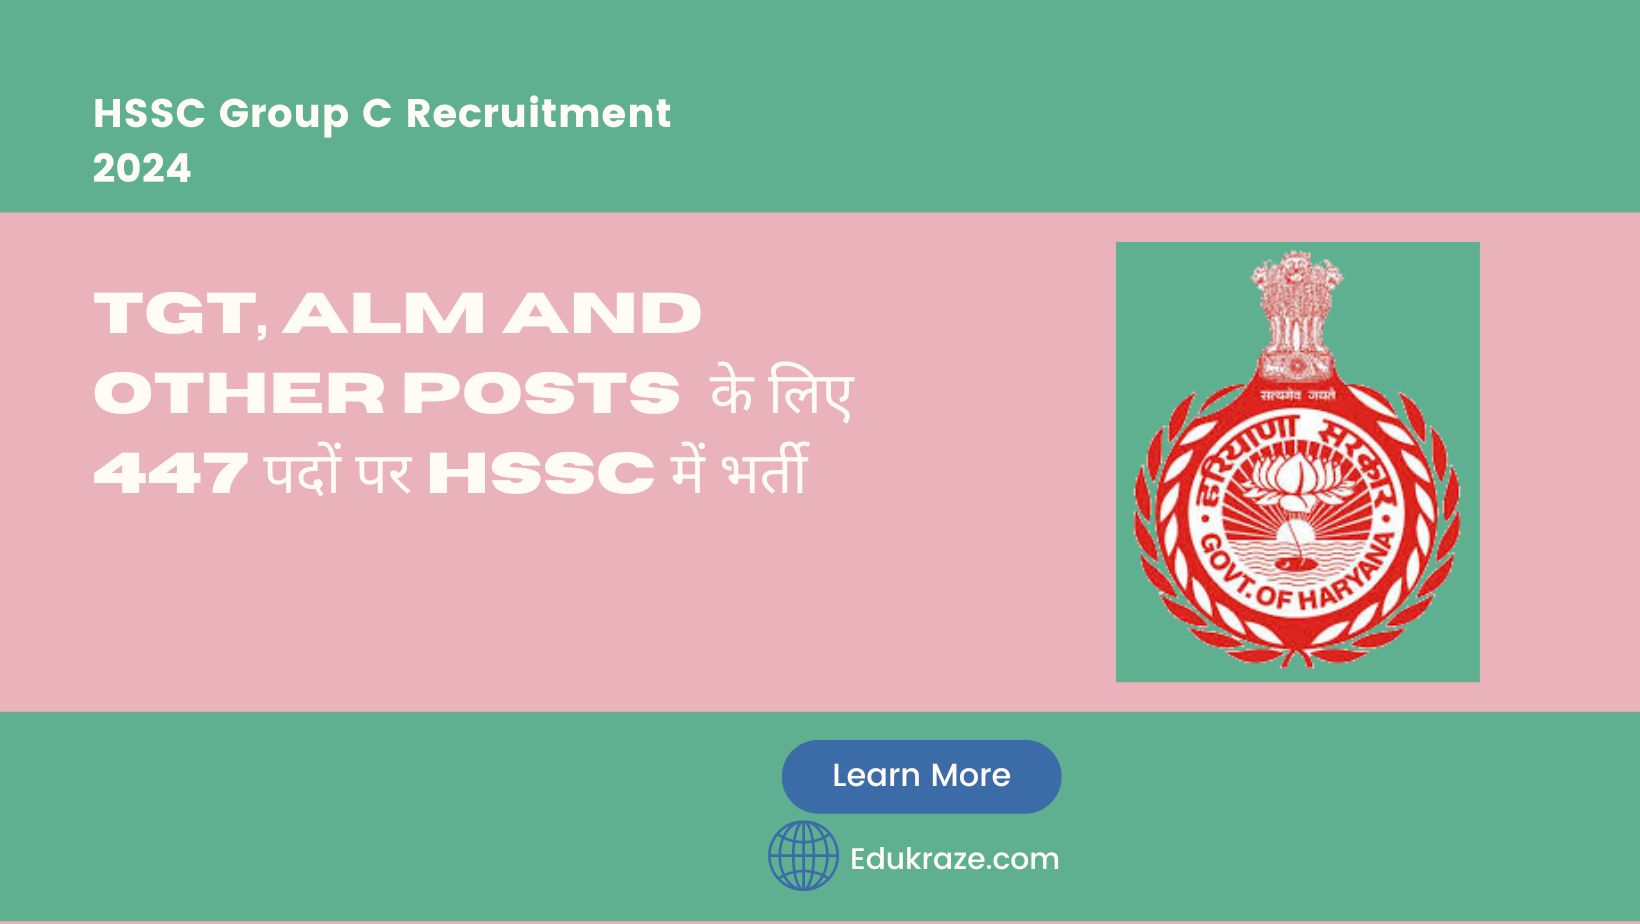 HSSC Group C Recruitment 2024 Out For 447 TGT, ALM And Other Posts at hssc.gov.in, Check Eligibility